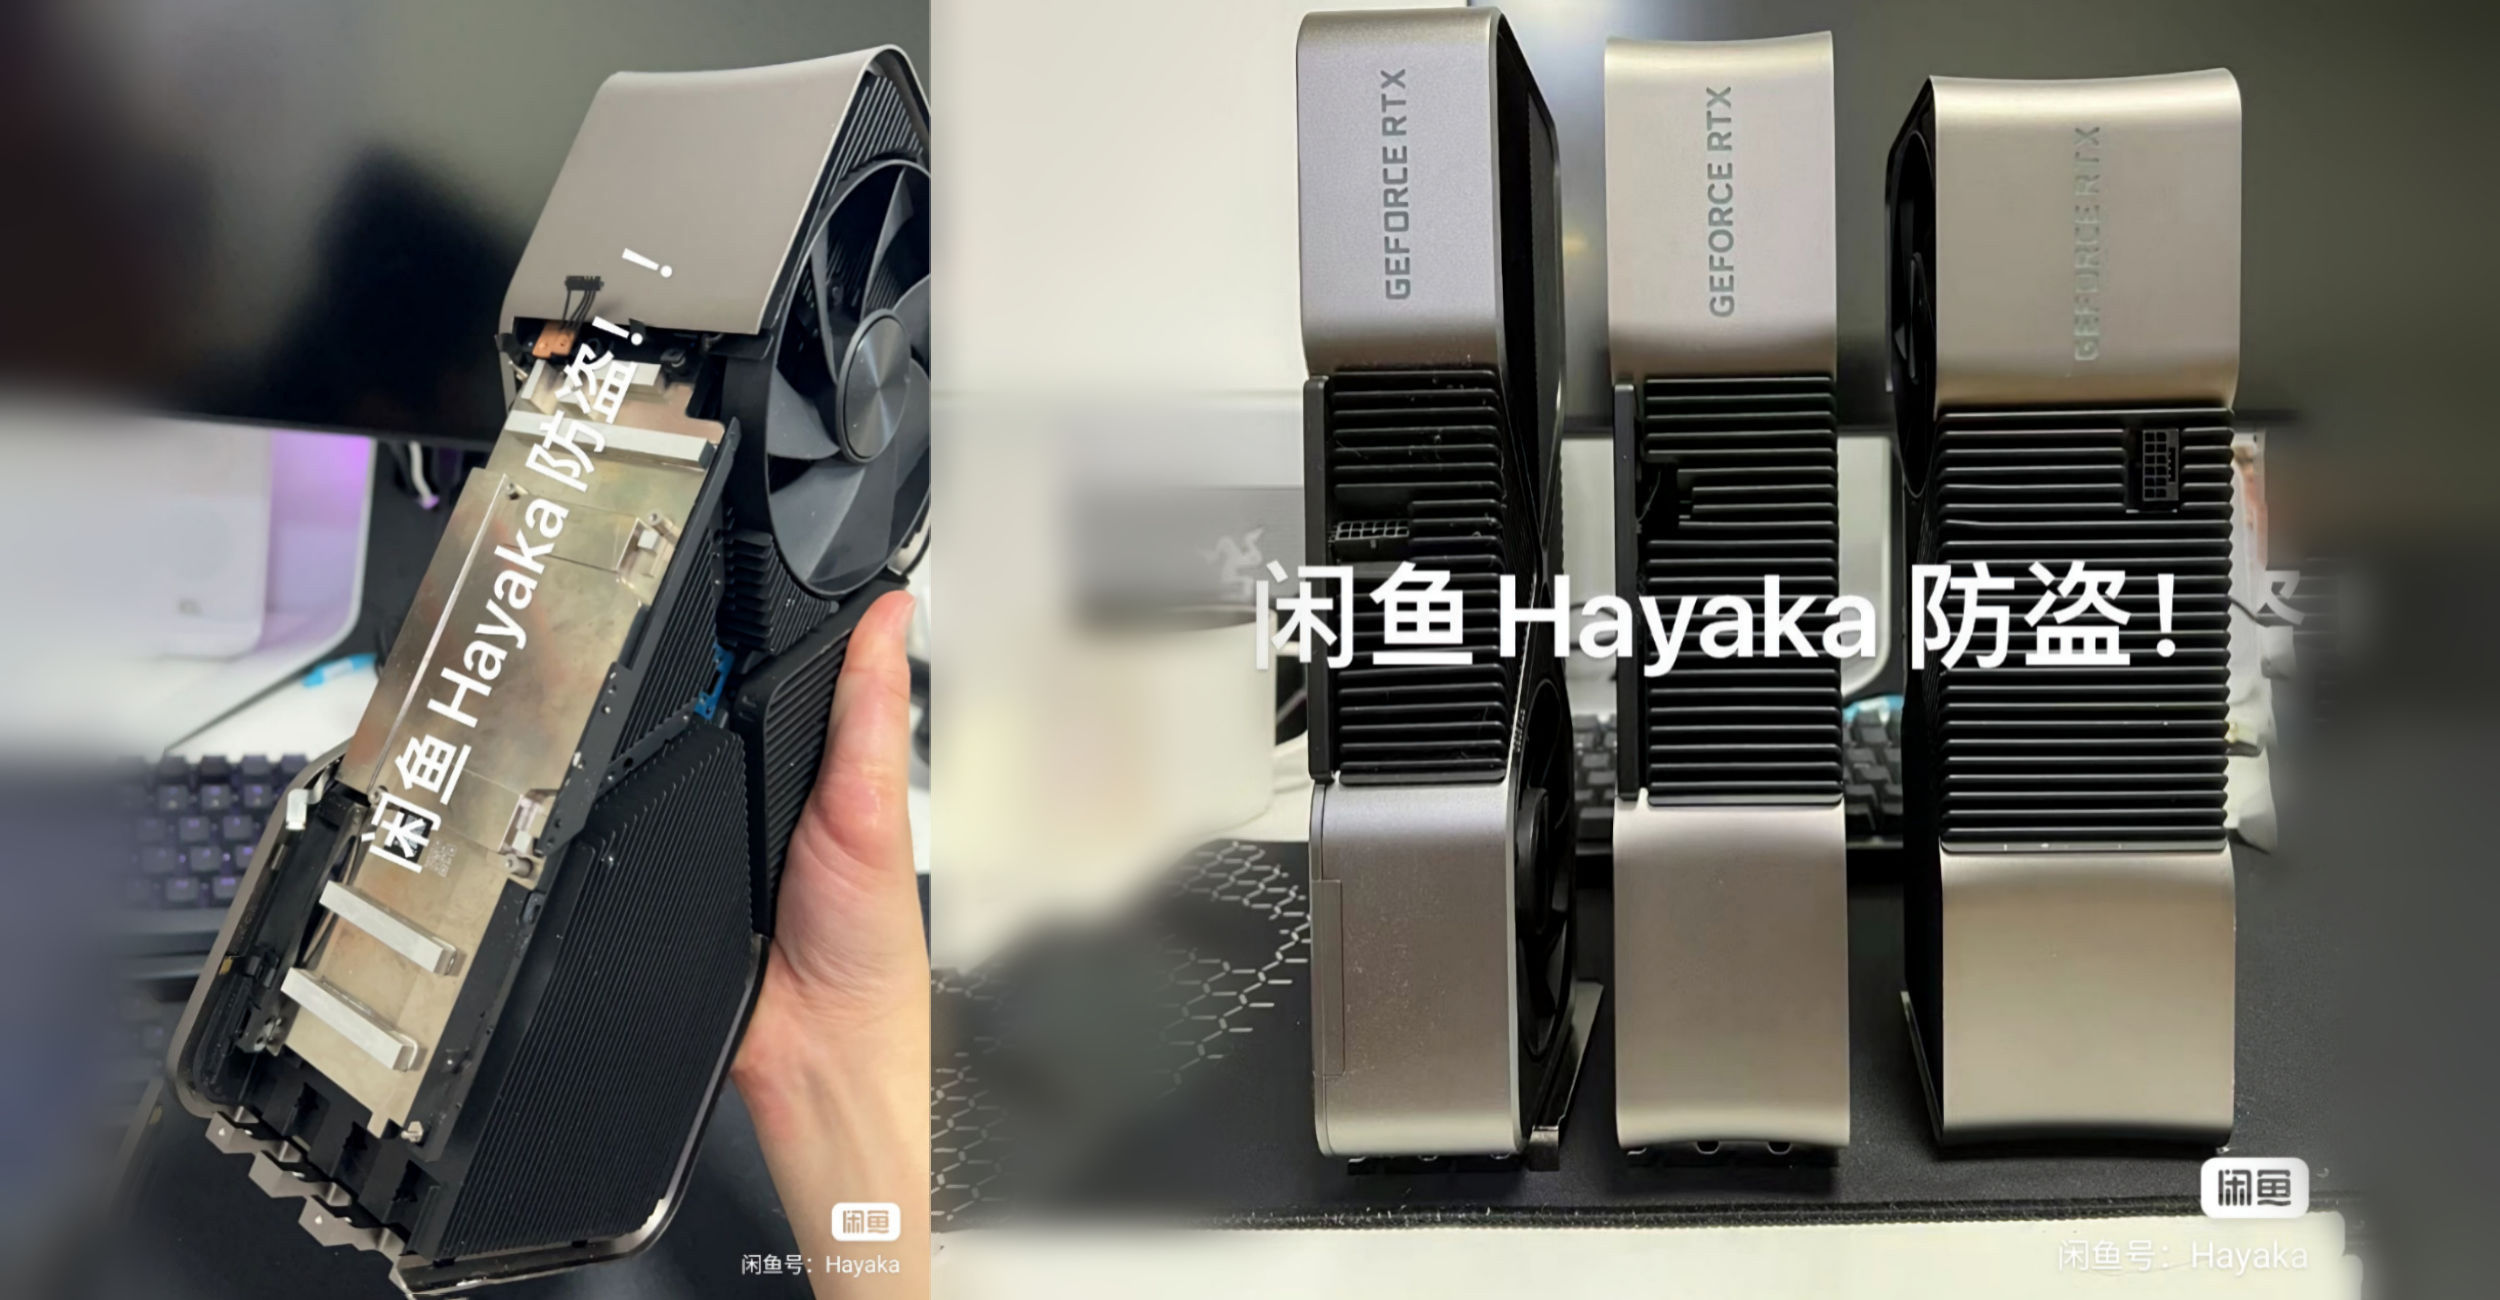 NVIDIA RTX 4090 Ti/TITAN cooler prototype listed for 120K USD in